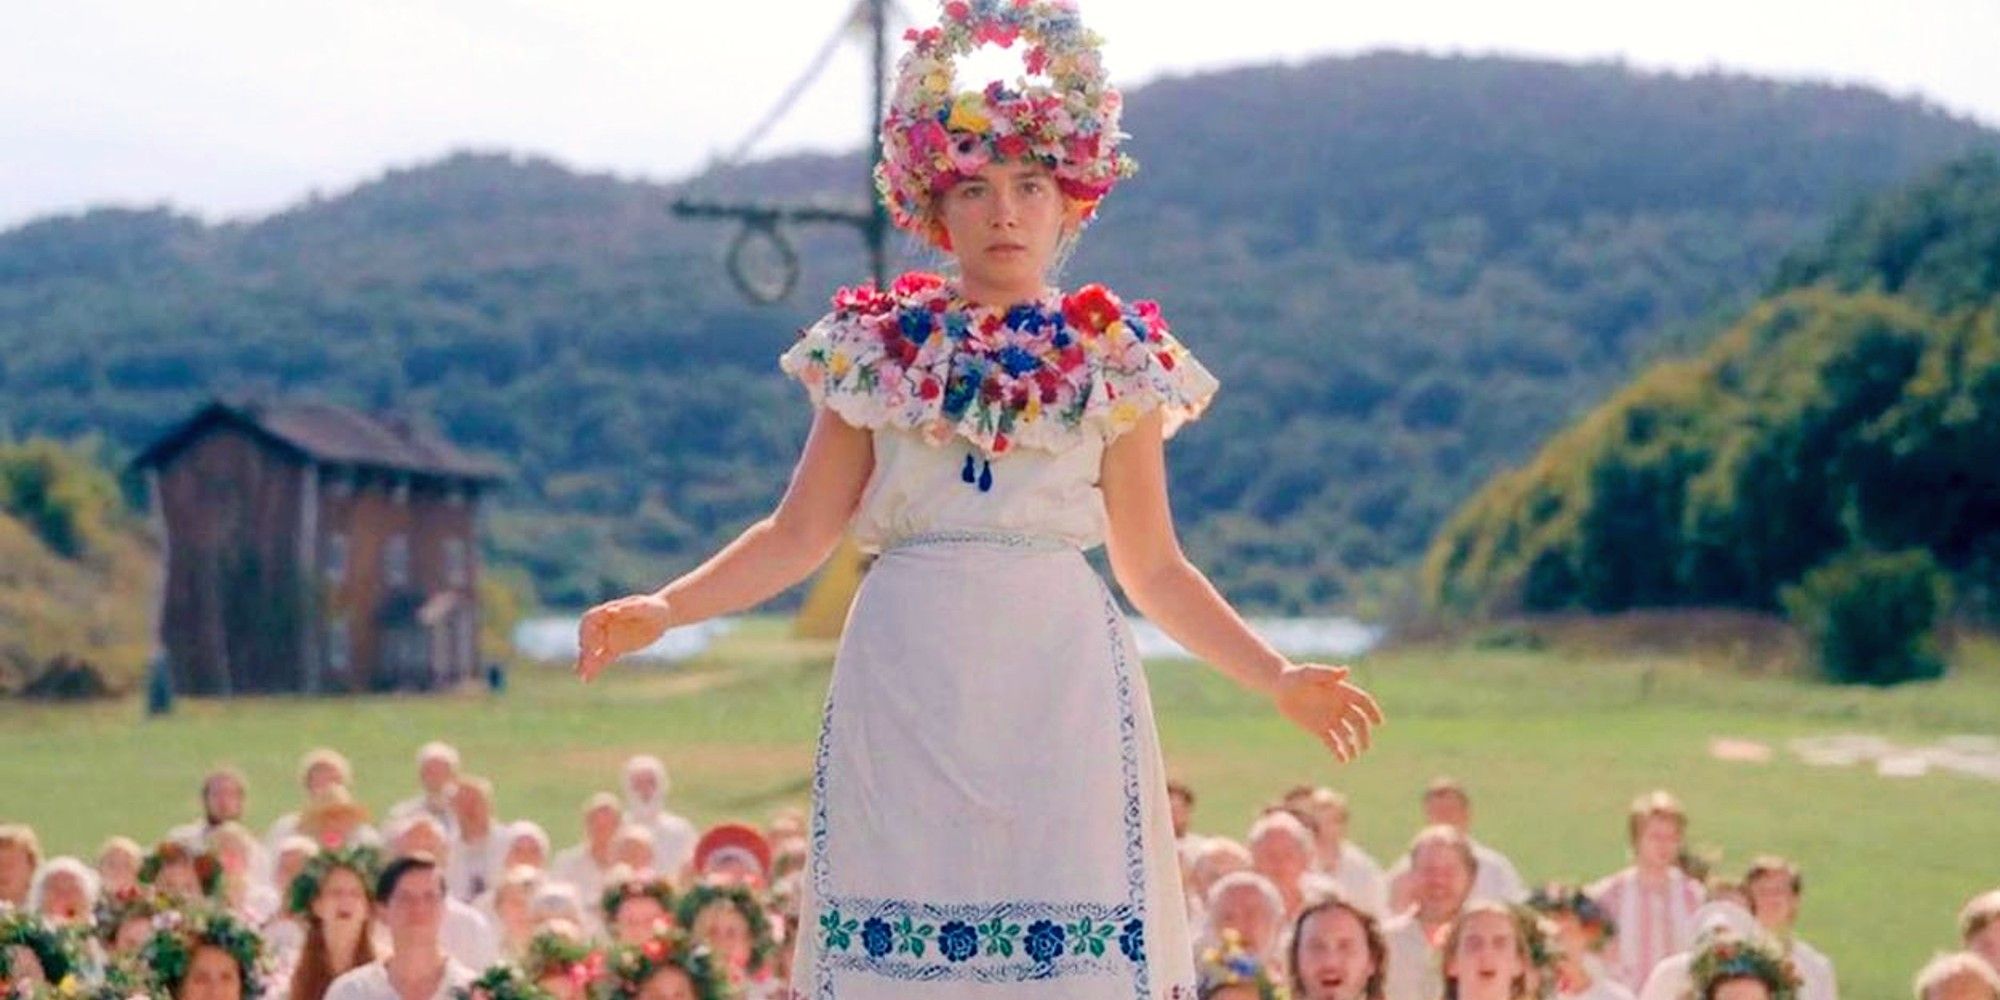 Florence Pugh as Dani Ardor dressed as the Queen of May in the summer solstice festivity